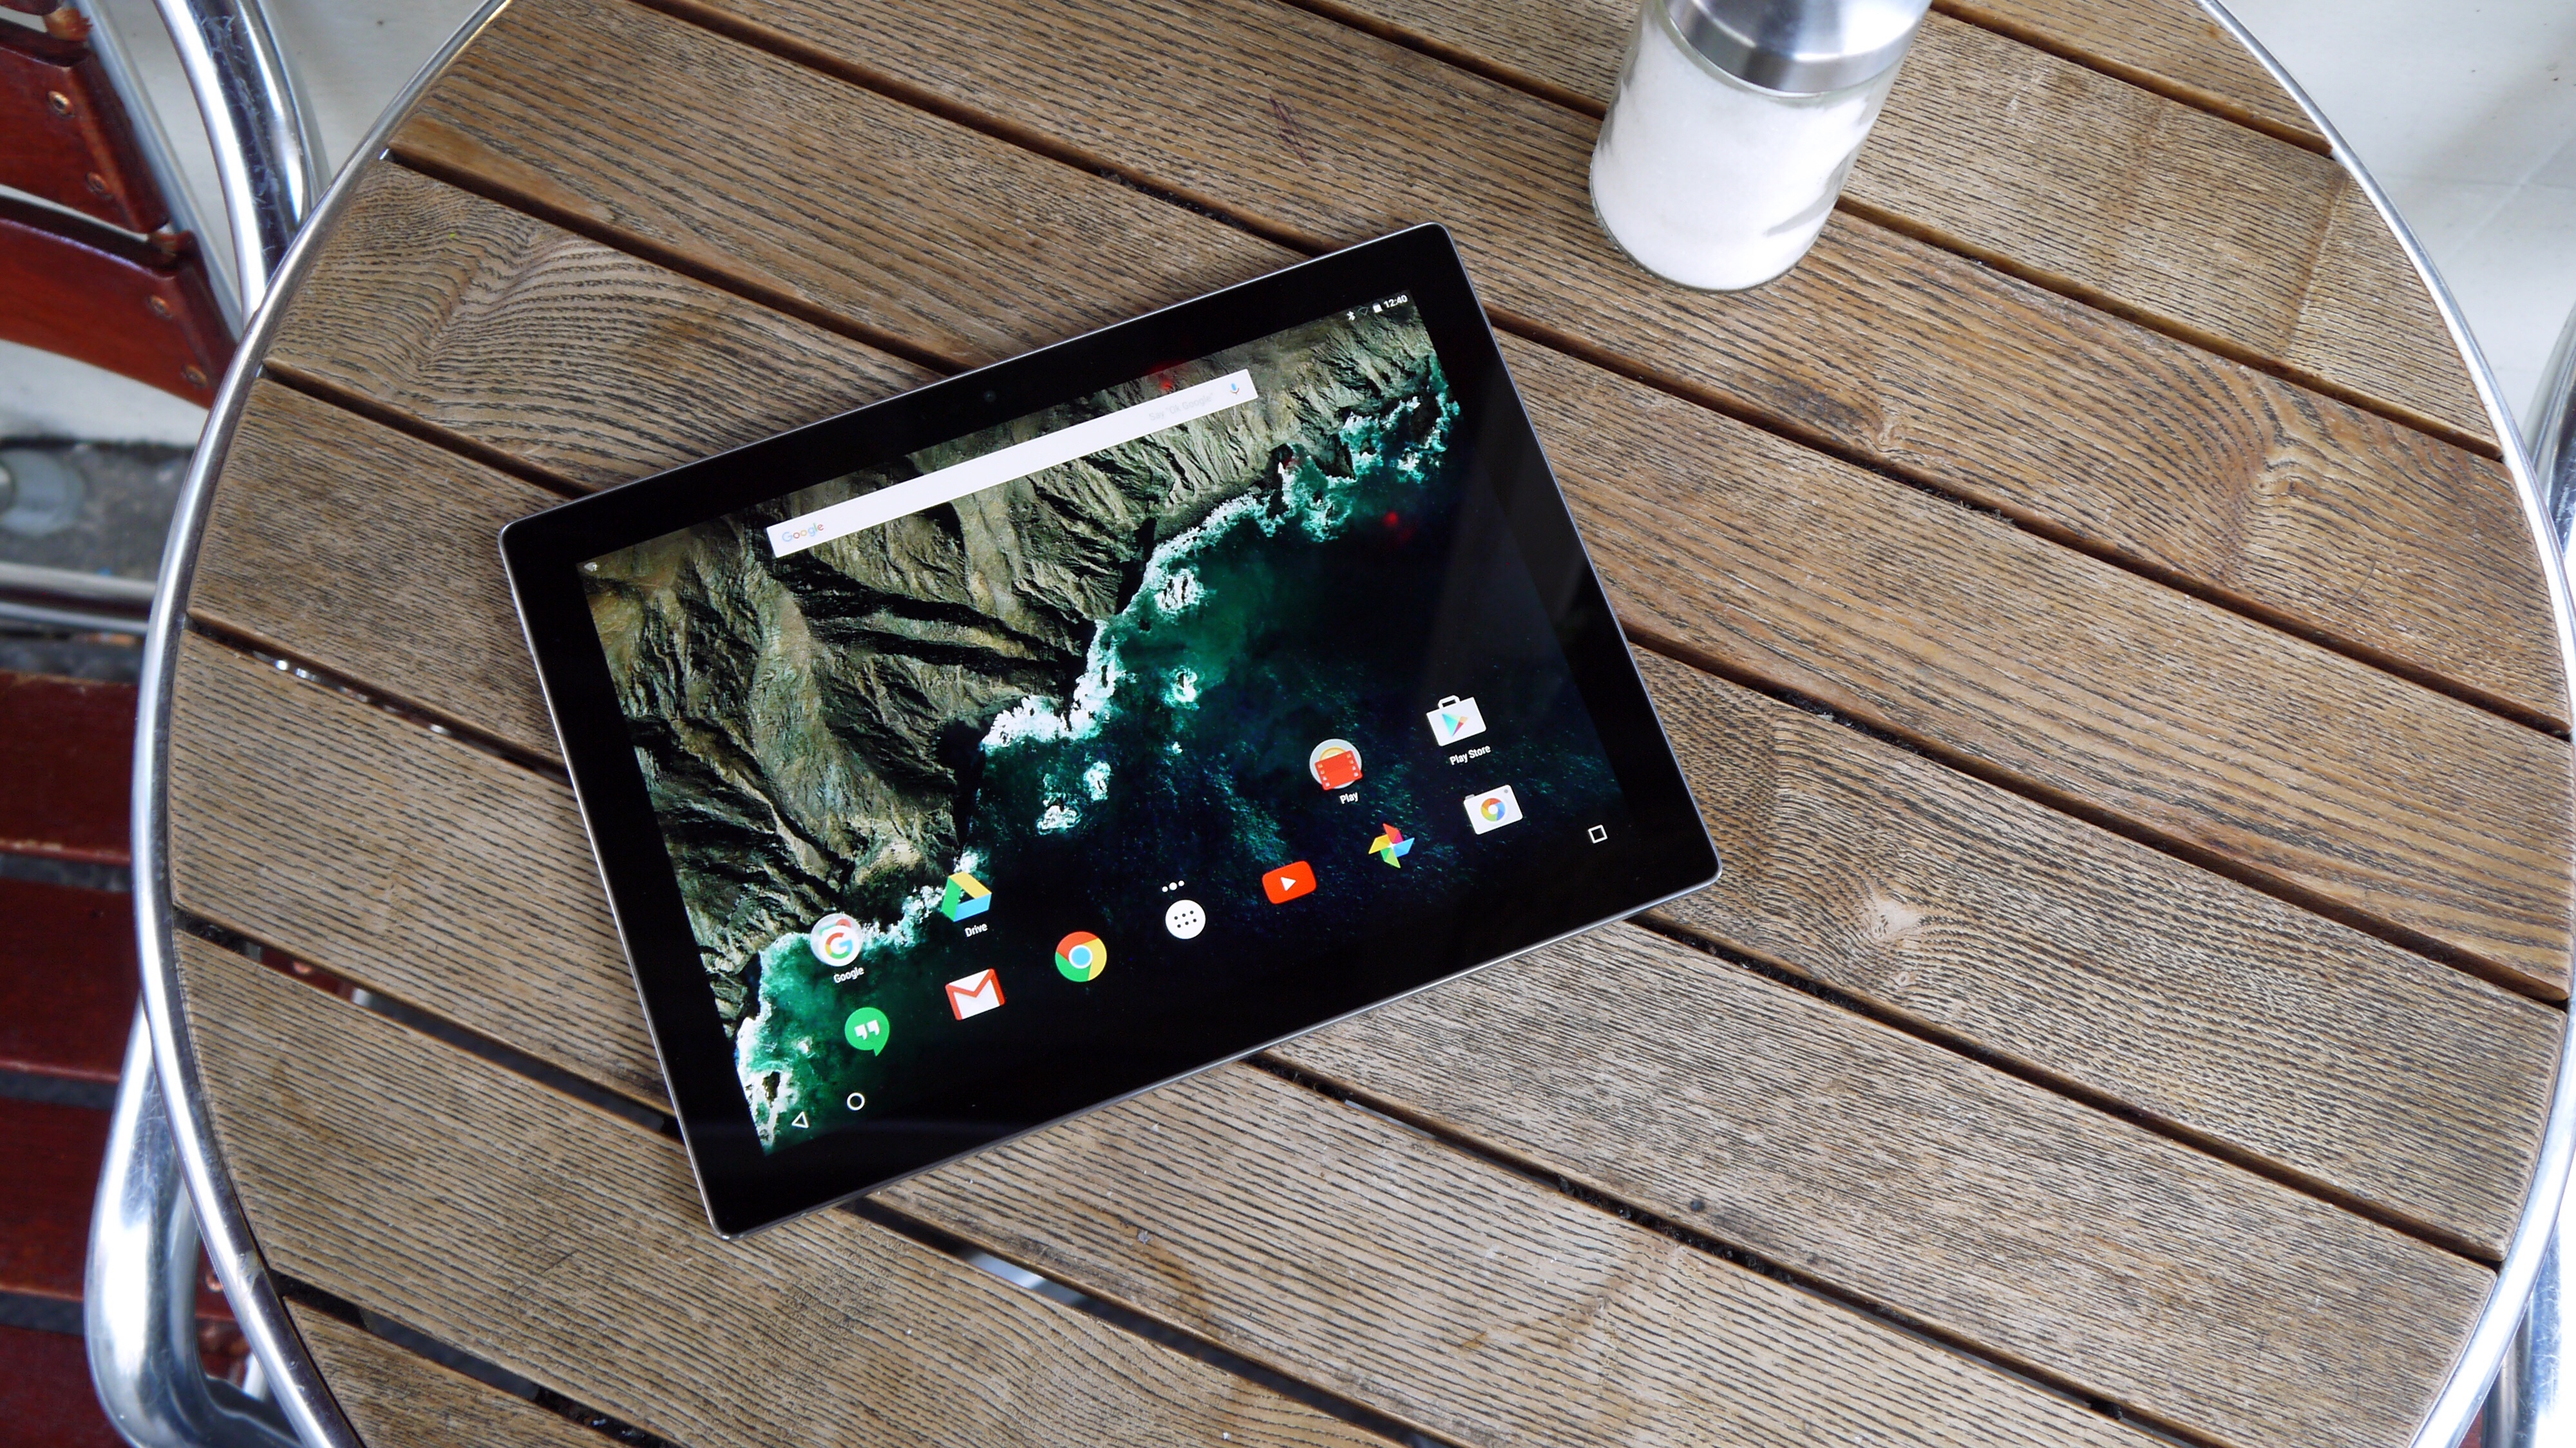 Android P is dropping support for Nexus 5X, Nexus 6P, and the Pixel C tablet